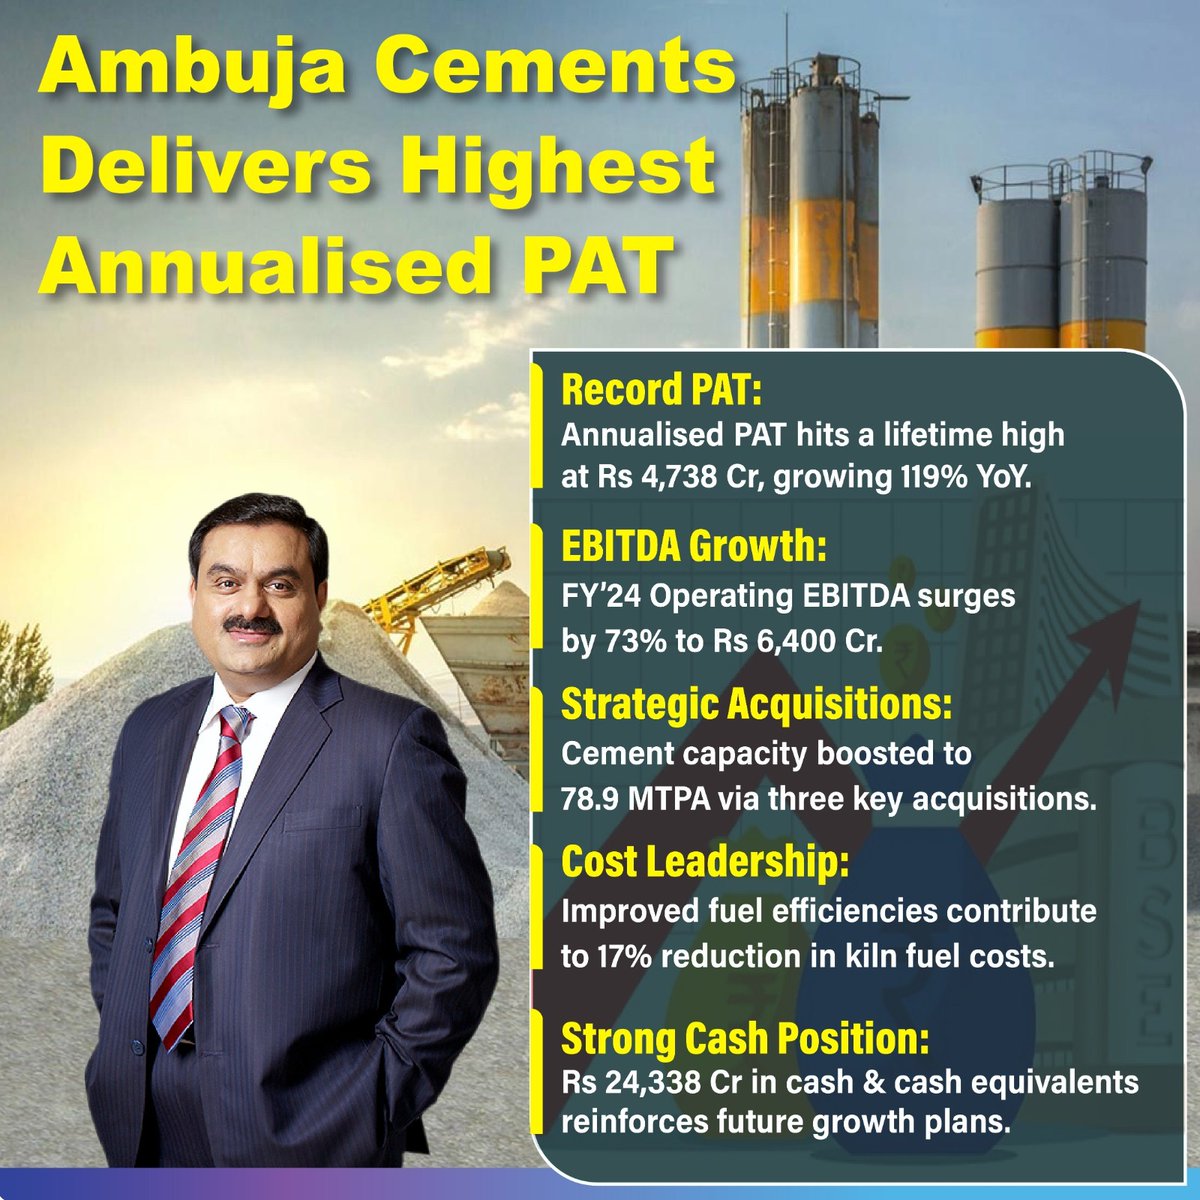 Ambuja Cements, with the strategic vision of the Adani Group, generated ₹5,646 crore in cash flows in FY24. 
#adani #ambujacement #adanigroup